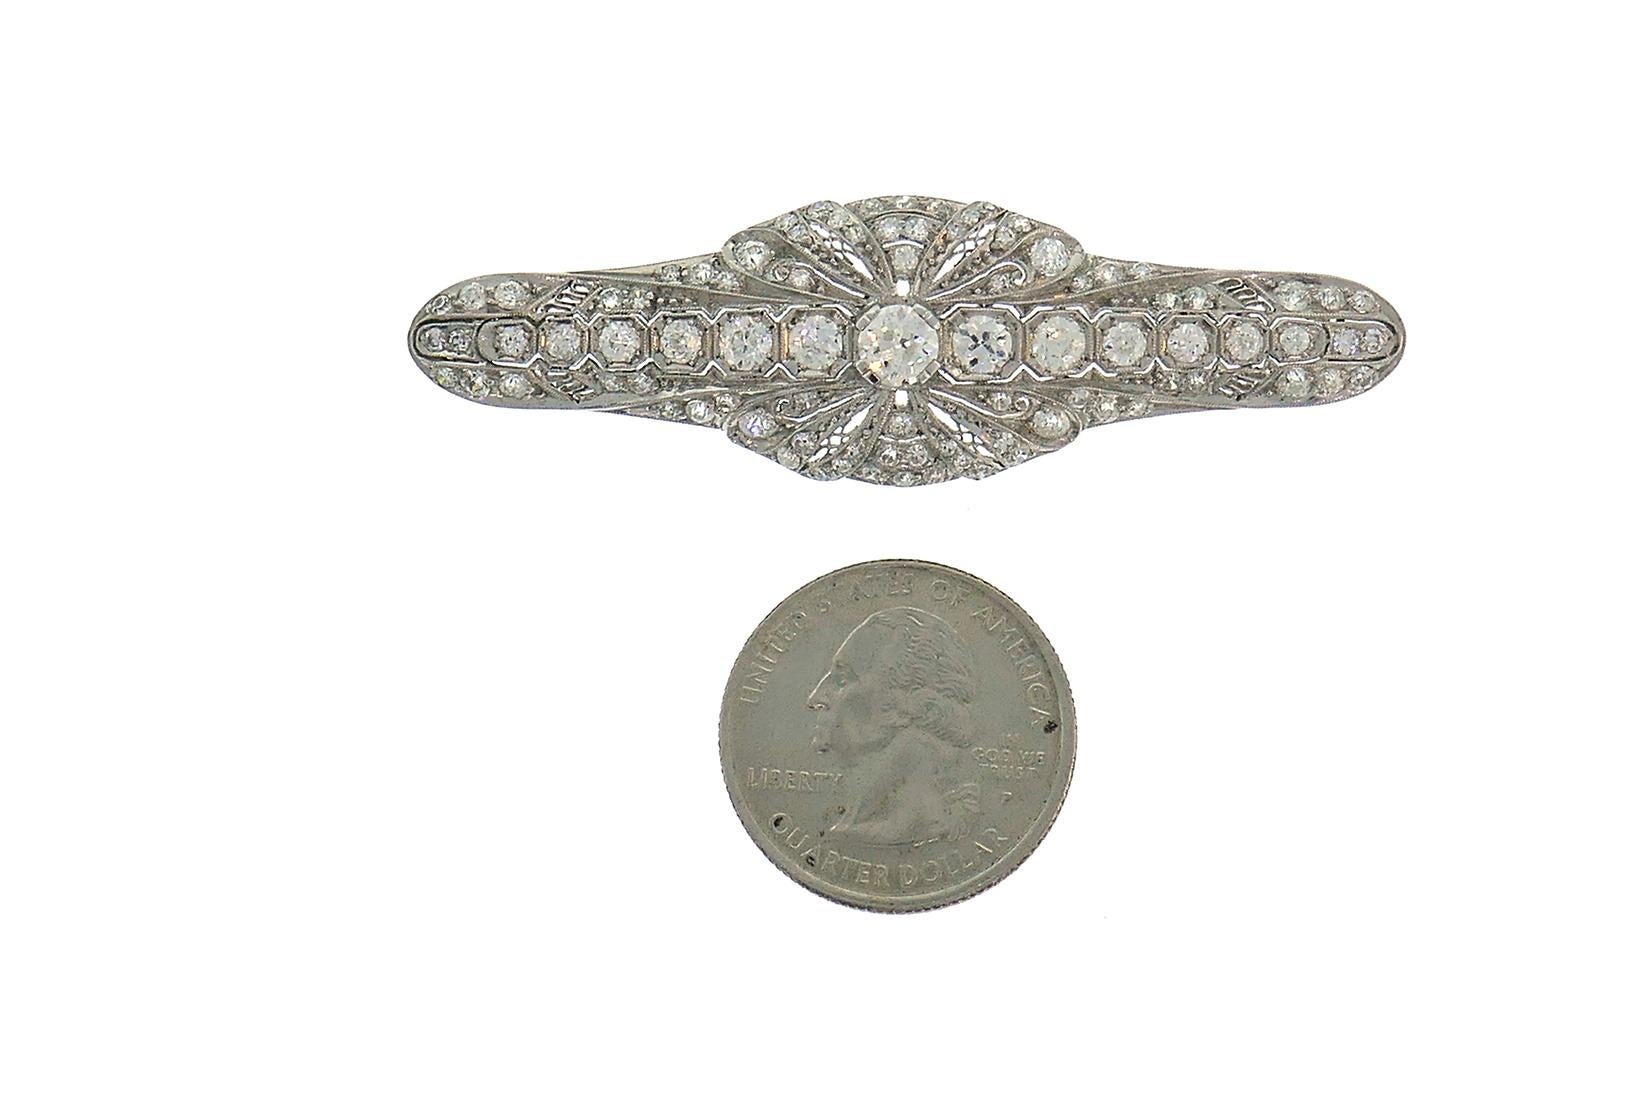 Classy Art Deco/Edwardian brooch created in the 1920-30s. 
Made of platinum (stamped) and set with Old European cut diamonds. The diamonds are G-I color, VS clarity, total weight approximately 3.50 carats. 
The pin stem is made of white